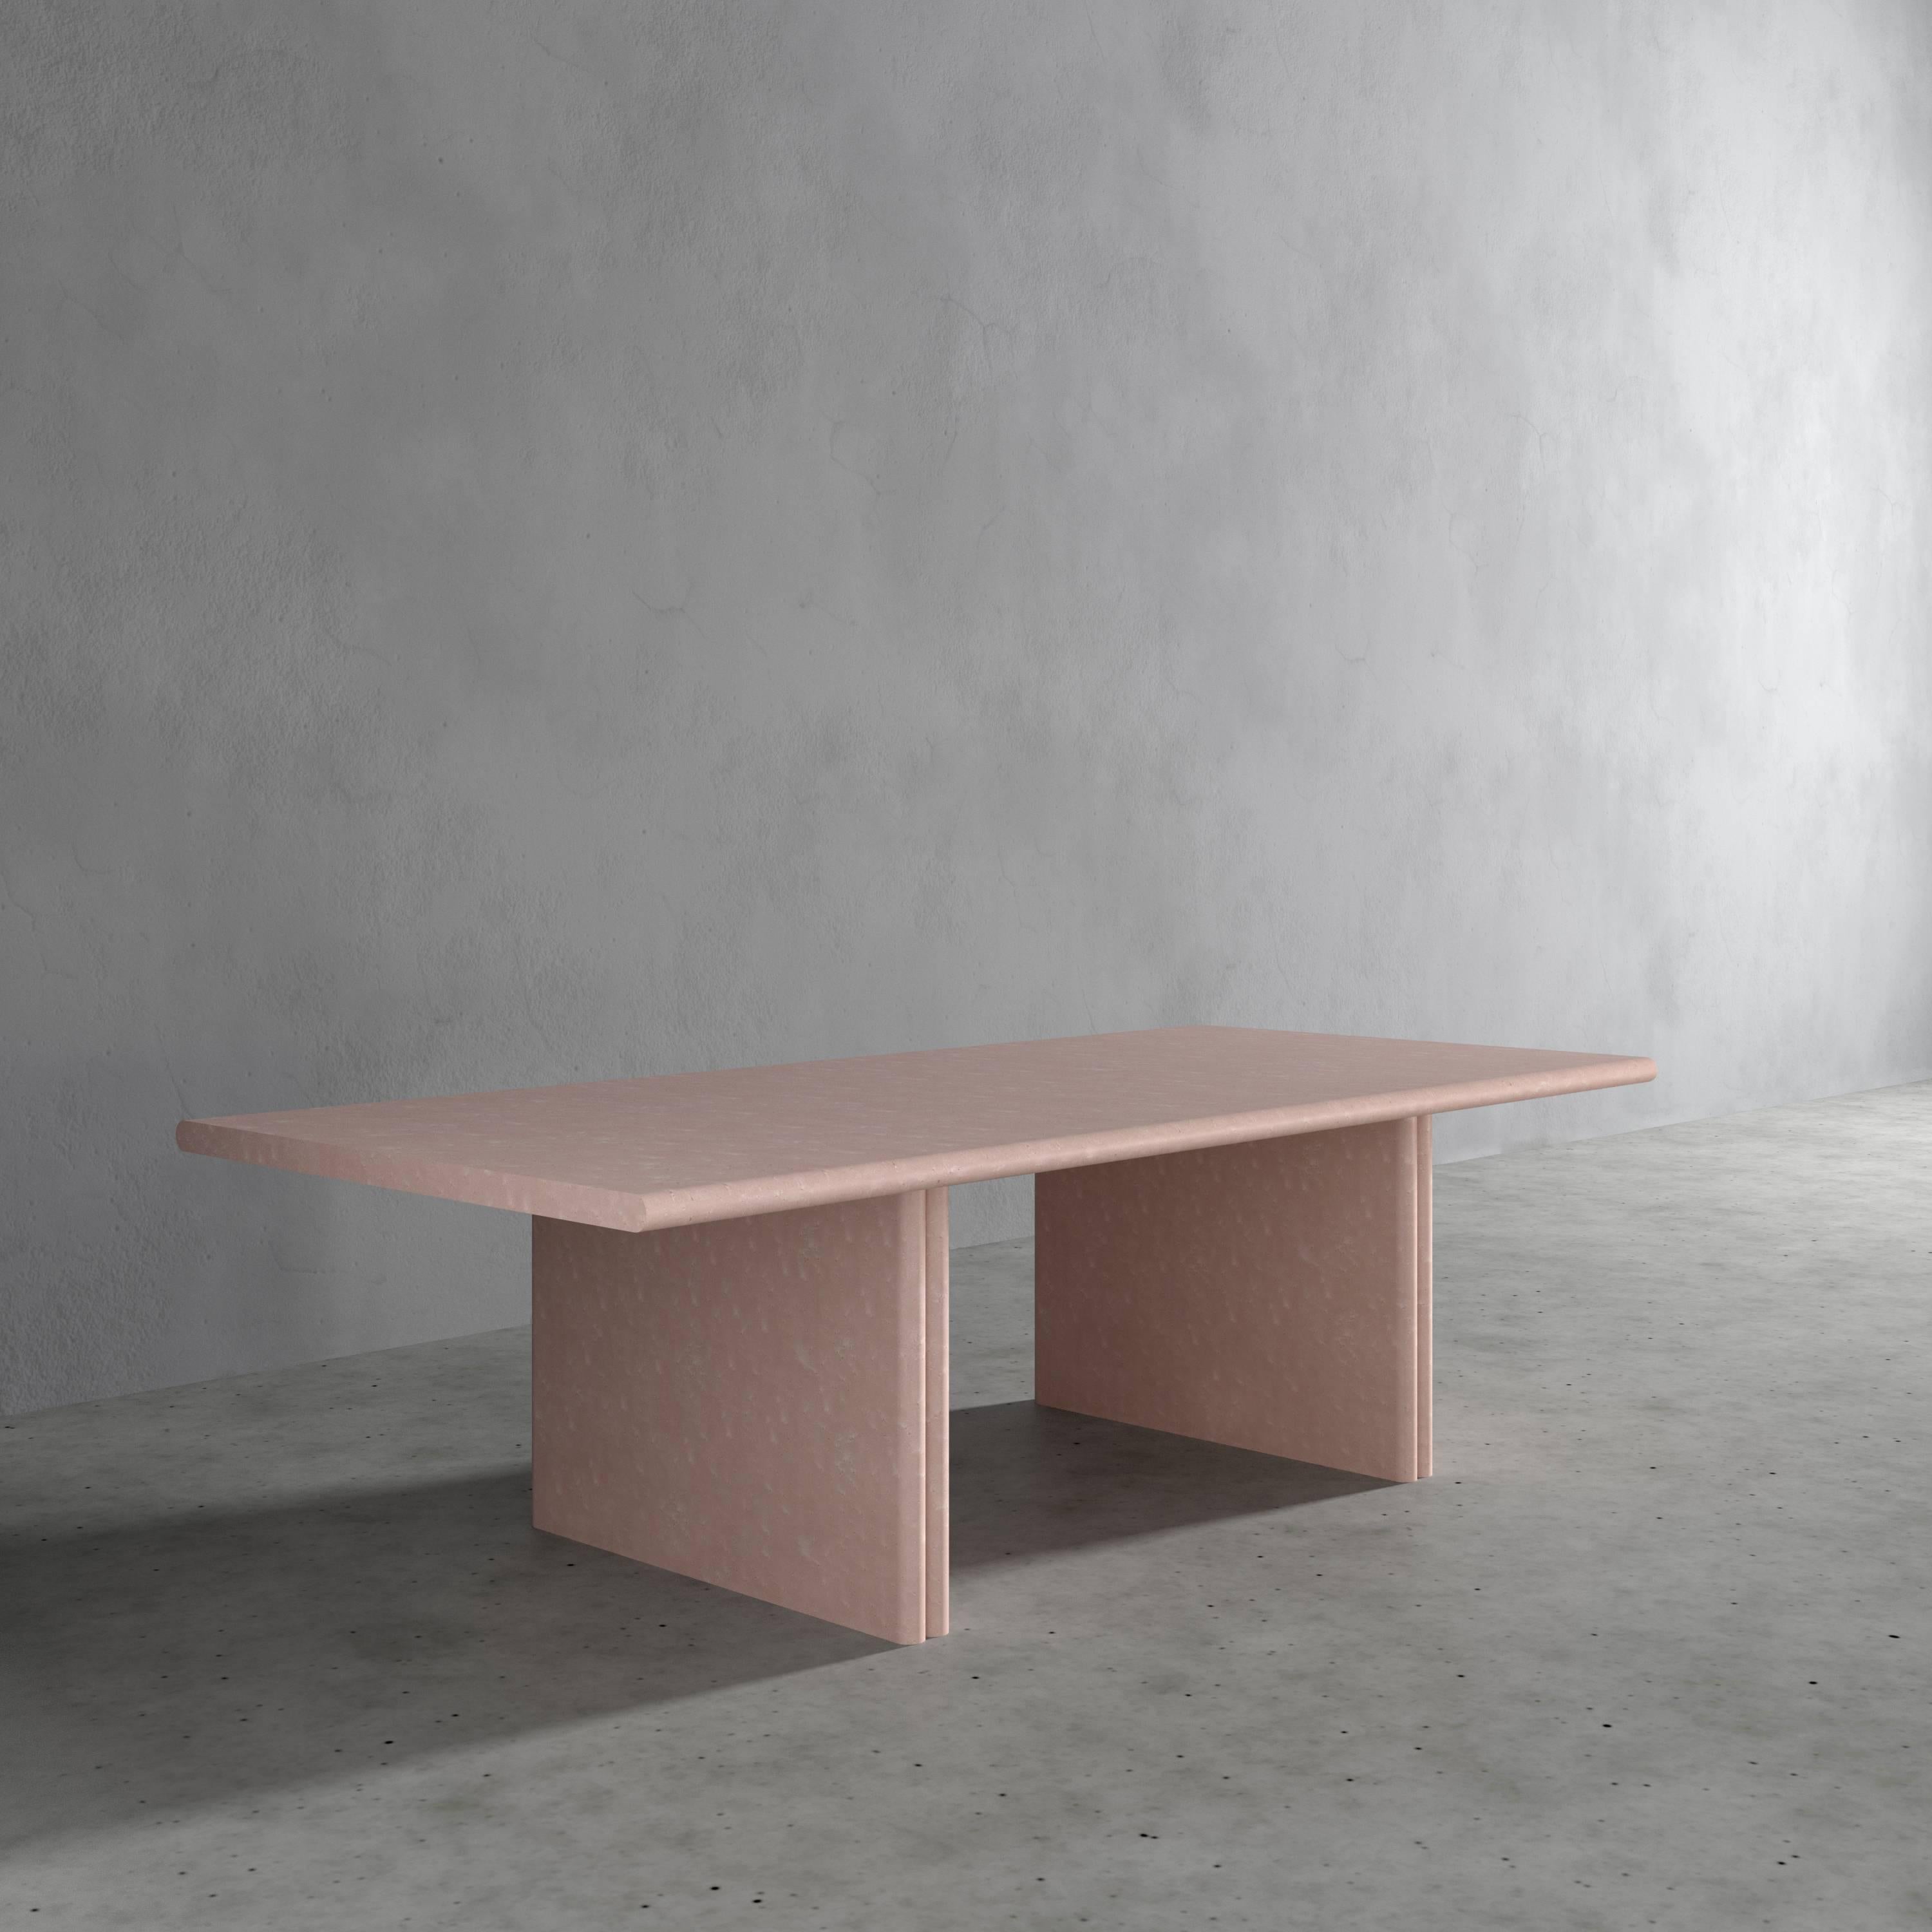 Jacques Rectangular Pastel Pink Dining Table by Fred and Juul
Dimensions: D 120 x W 260 x H 74 cm.
Materials: Birdseye Maple veneer on MDF.

Available in different colors. Custom sizes, materials or finishes are available on request. Please contact